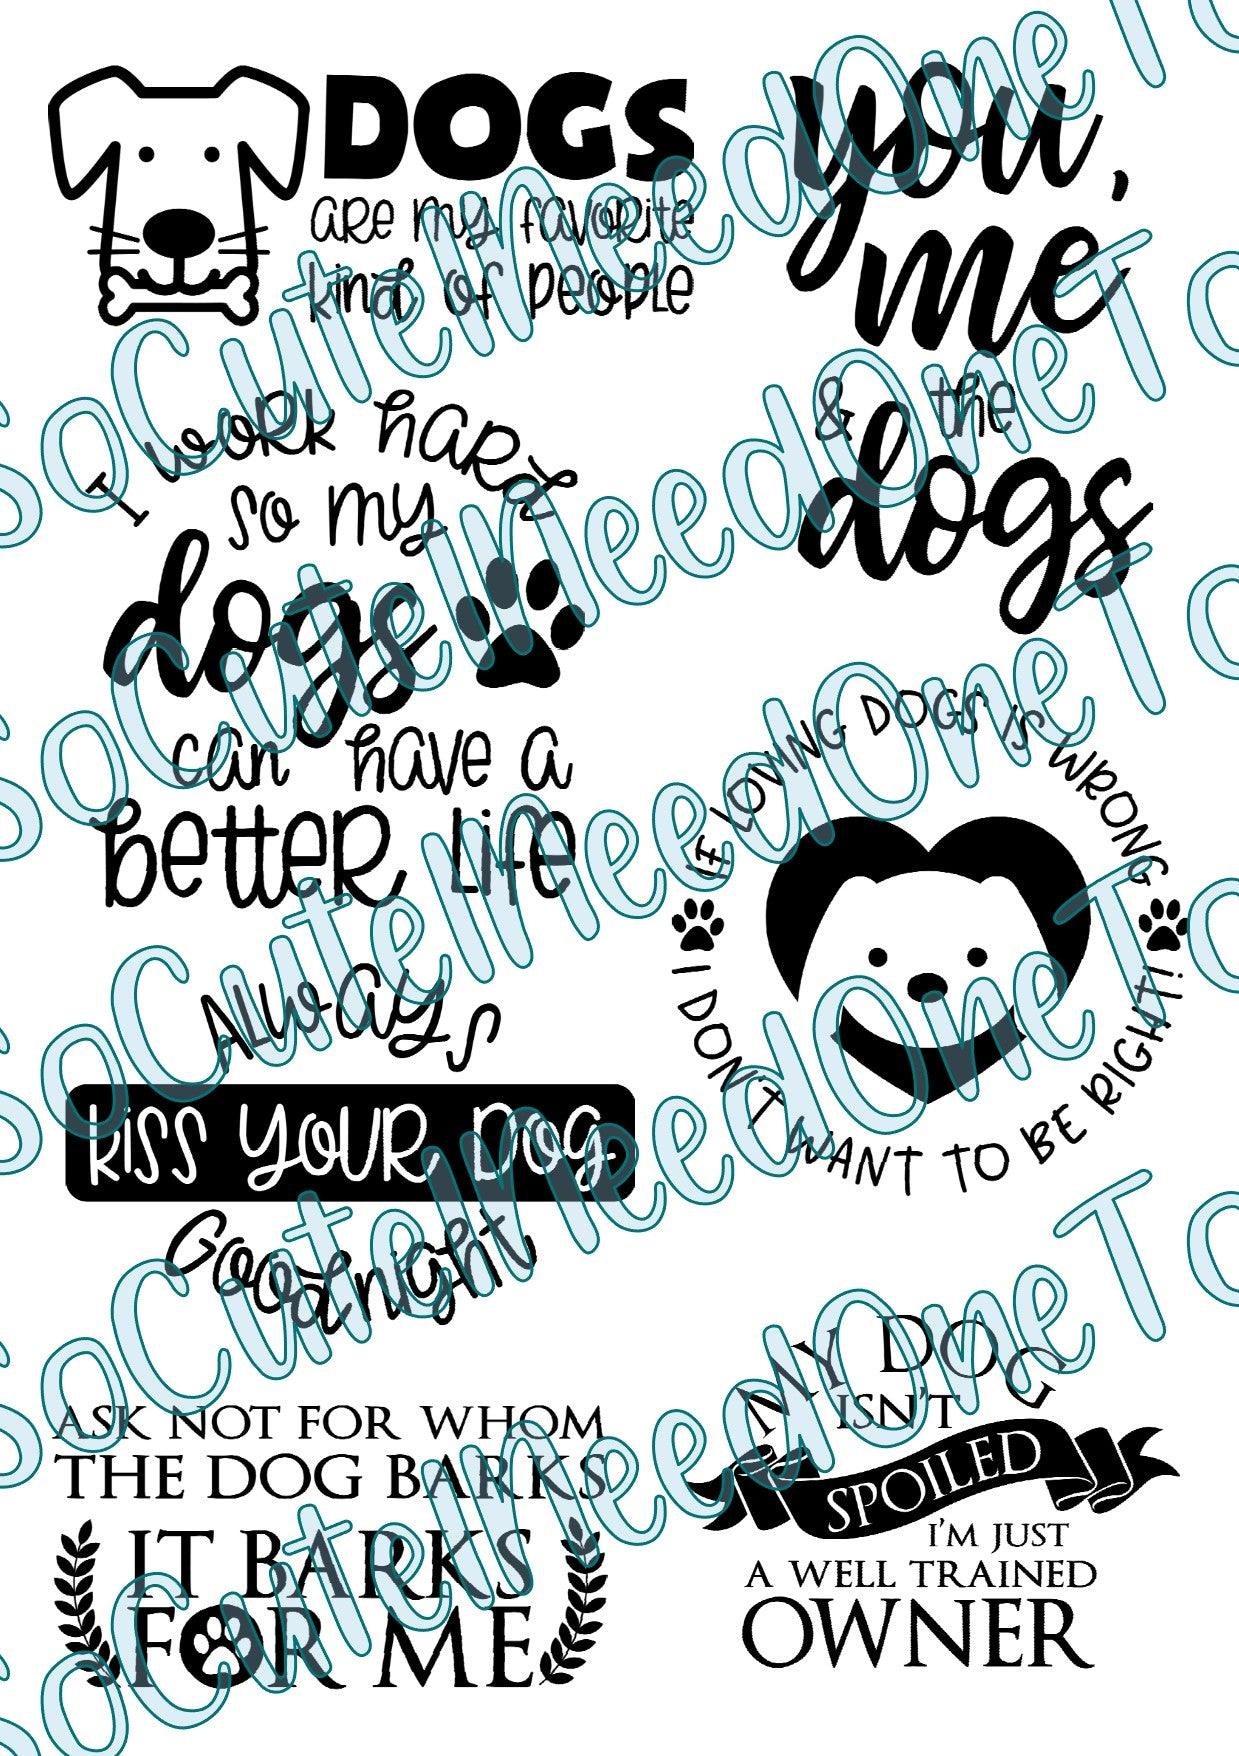 Dogs Rule #1 on Clear/White Waterslide Paper Ready To Use - SoCuteINeedOneToo